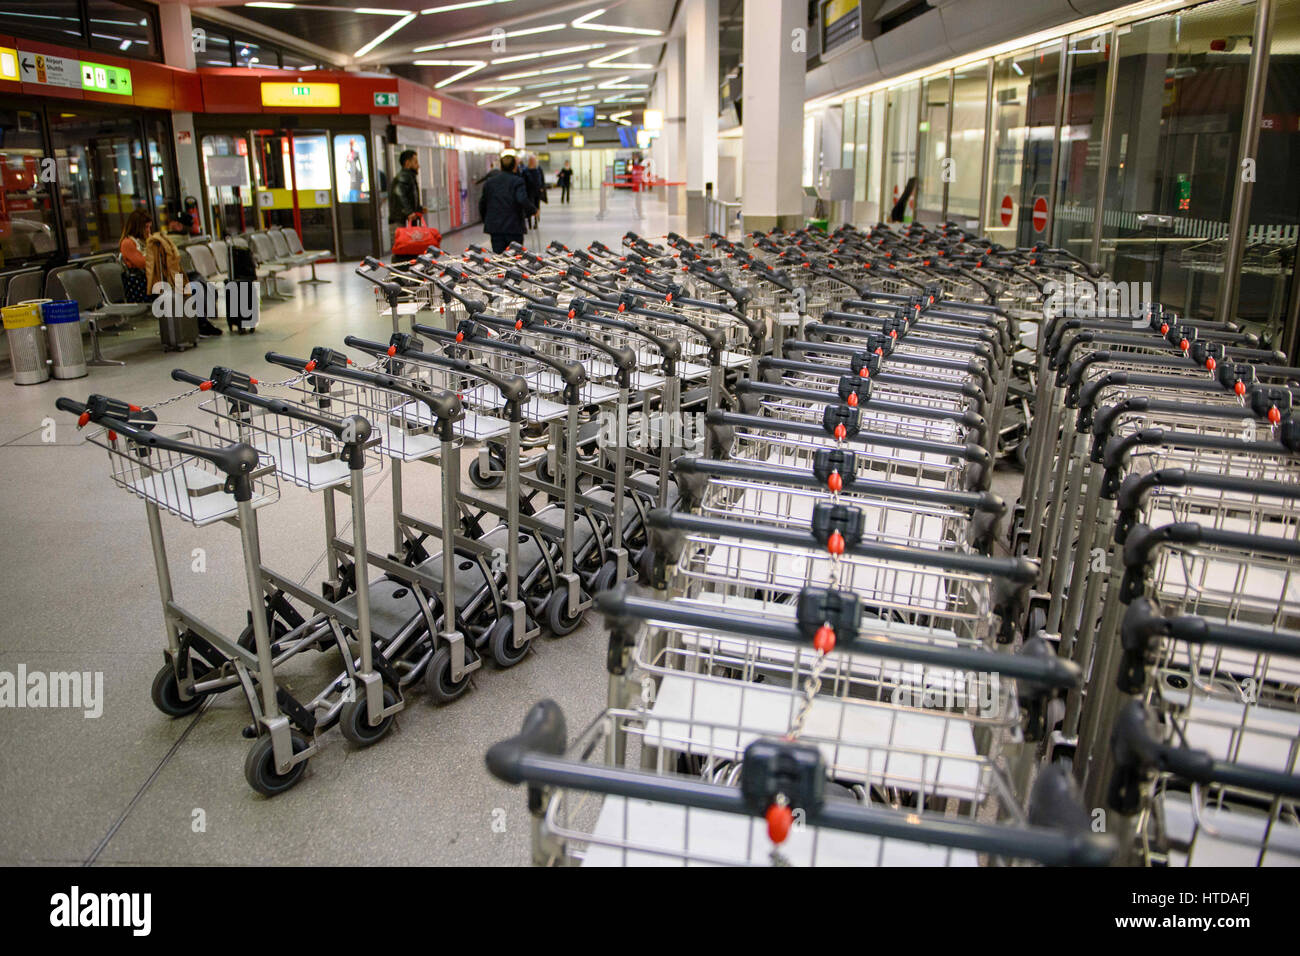 Berlin, Germany. 10th Mar, 2017. Unused baggage carts seen in a terminal building at Tegel Airport in Berlin, Germany, 10 March 2017. German trade union Verdi had called on some 2,000 ground staff to join the strike. The strike began on 10 March 2017 at 03:00 GMT and is to end on 11 March 2017 at 04:00 GMT. The main reason for the strike is the ongoing labour dispute between Verdi and the Forum of Ground Transport Service Providers in which the companies operating at the airports are organized. The trade union is demanding a pay rise for ground staff. Photo: Gregor Fischer/dpa/Alamy Live News Stock Photo